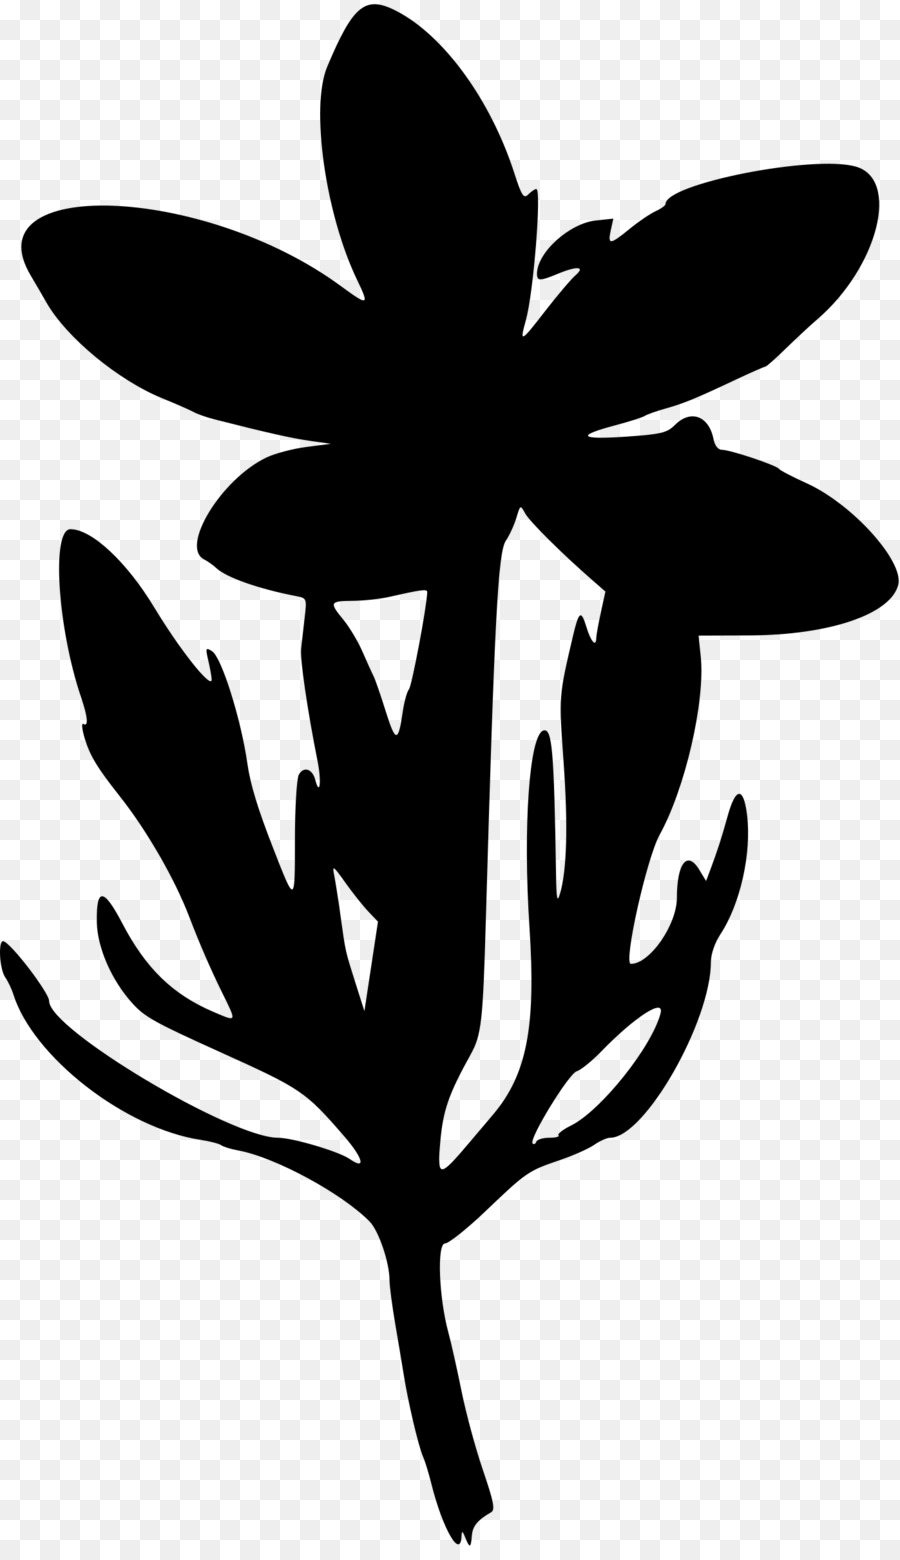 Silhouette Gentian Clip art - silhouettes clipart png download - 1397*2400 - Free Transparent Silhouette png Download.